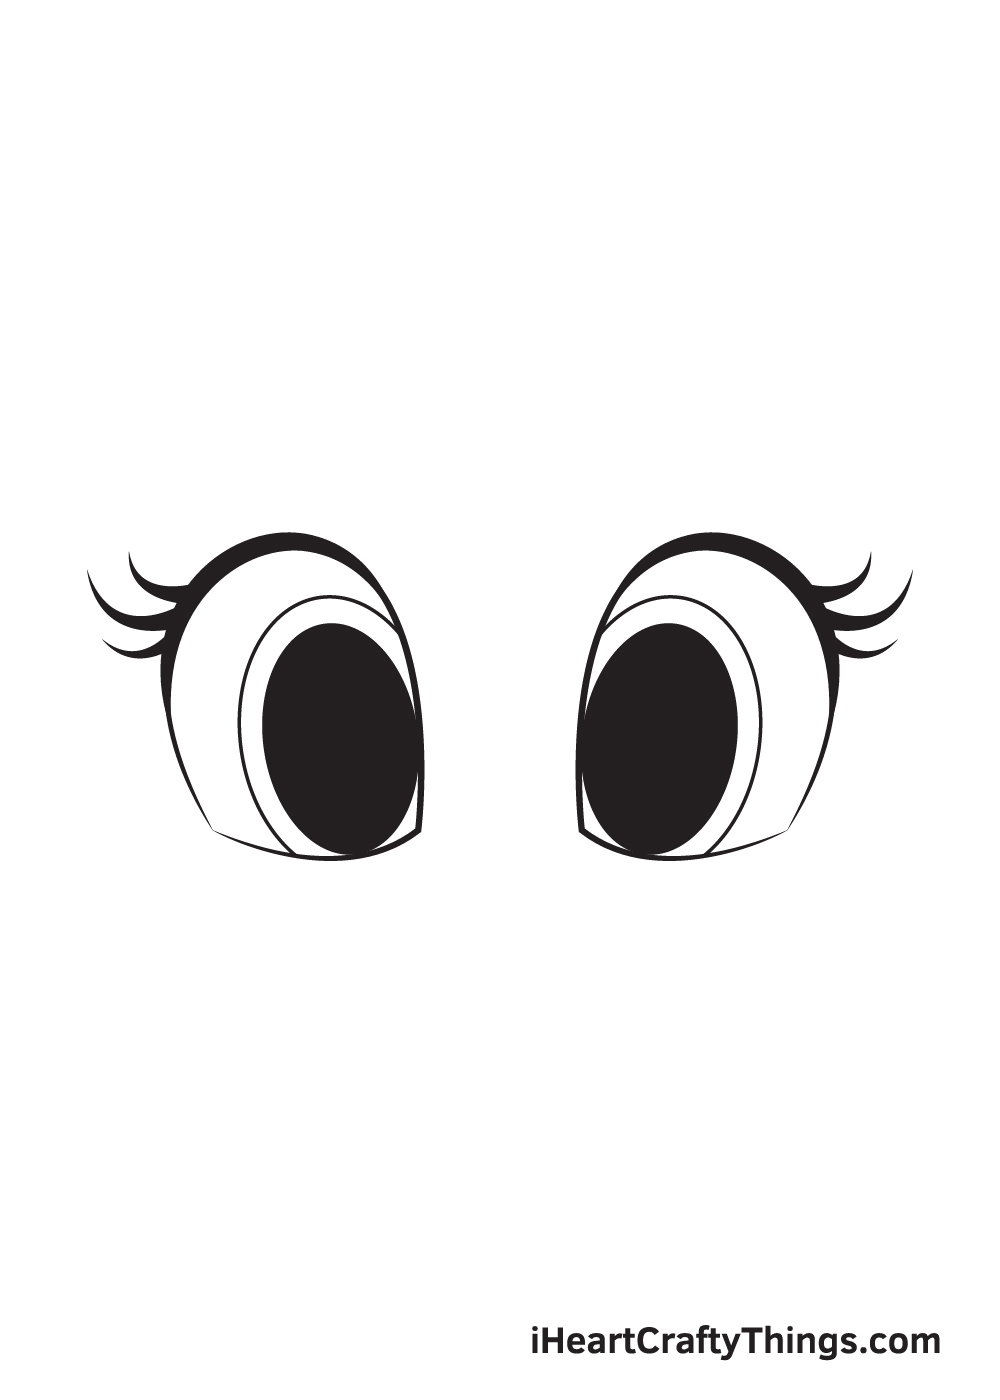 How to Draw Cute Eyes – A Step by Step Guide